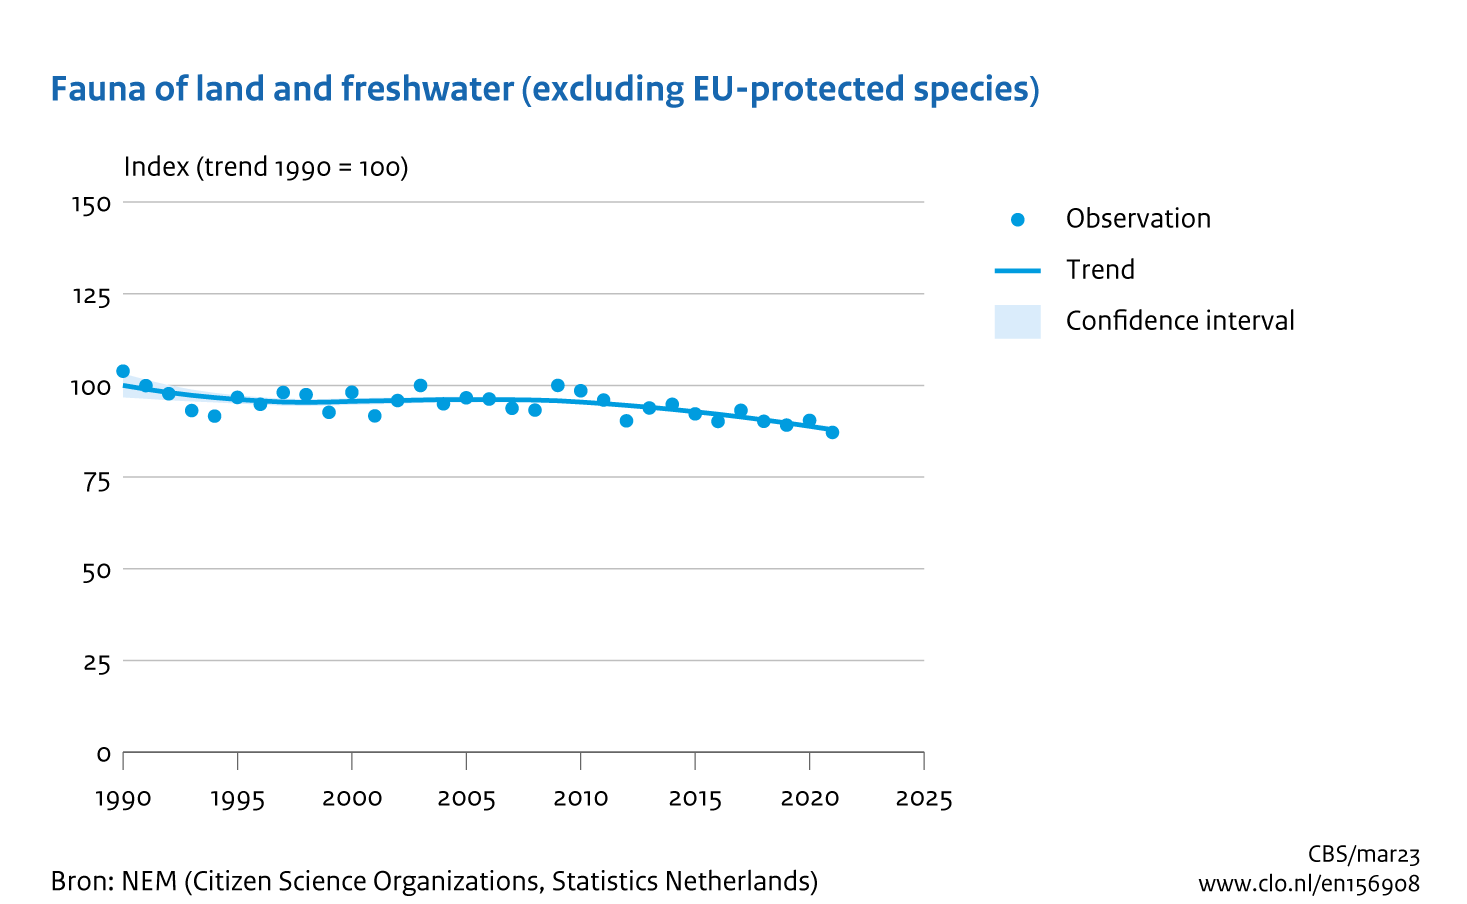 Image LPI excl. EU protected species. The image is further explained in the text.